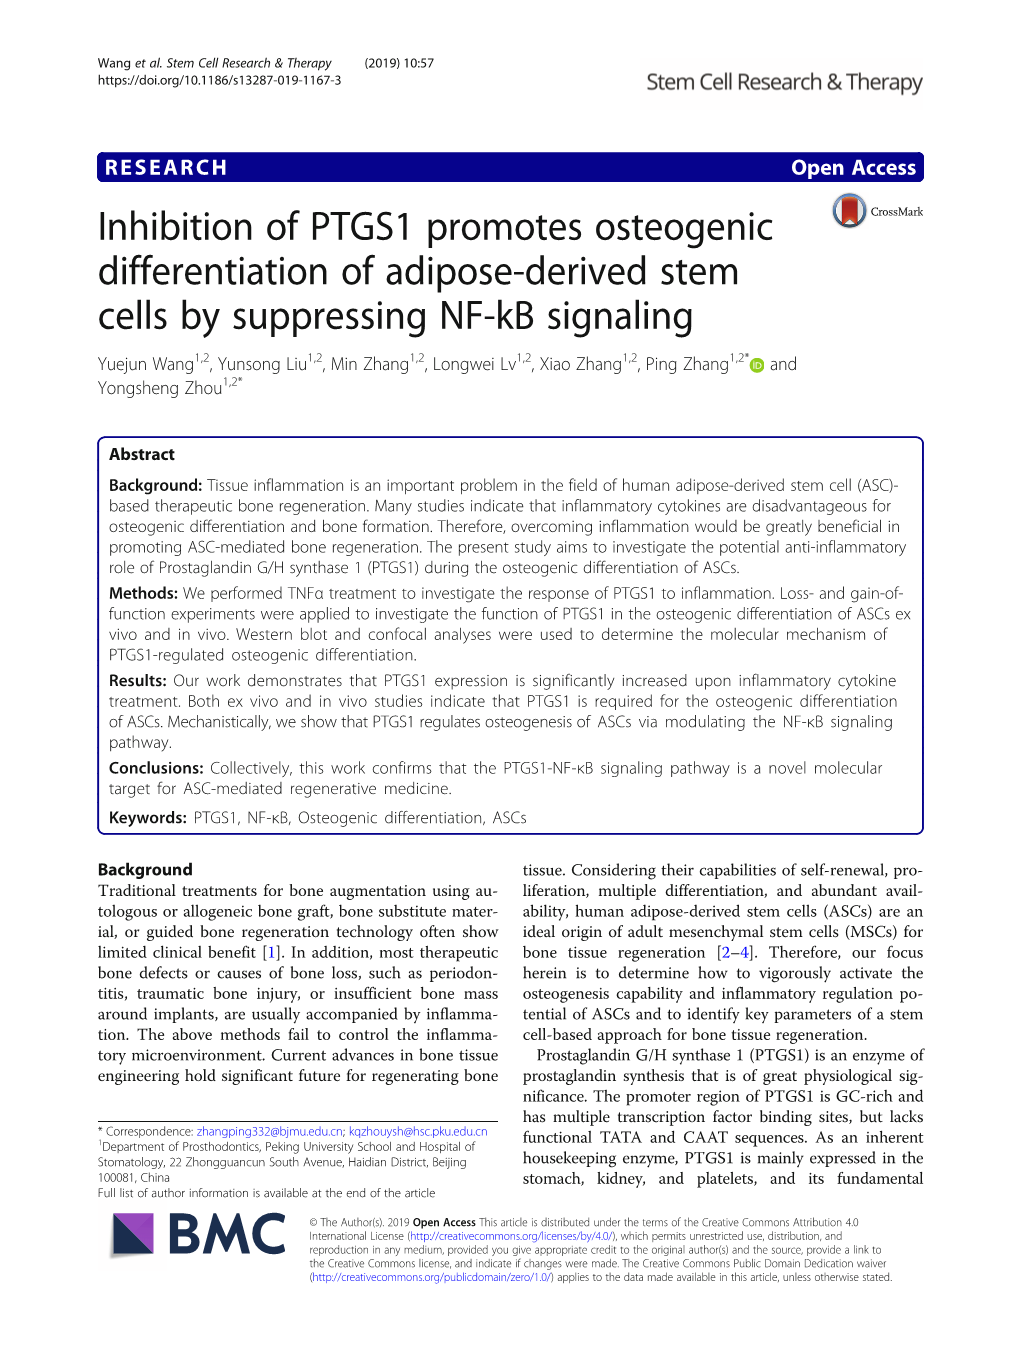 Inhibition of PTGS1 Promotes Osteogenic Differentiation Of